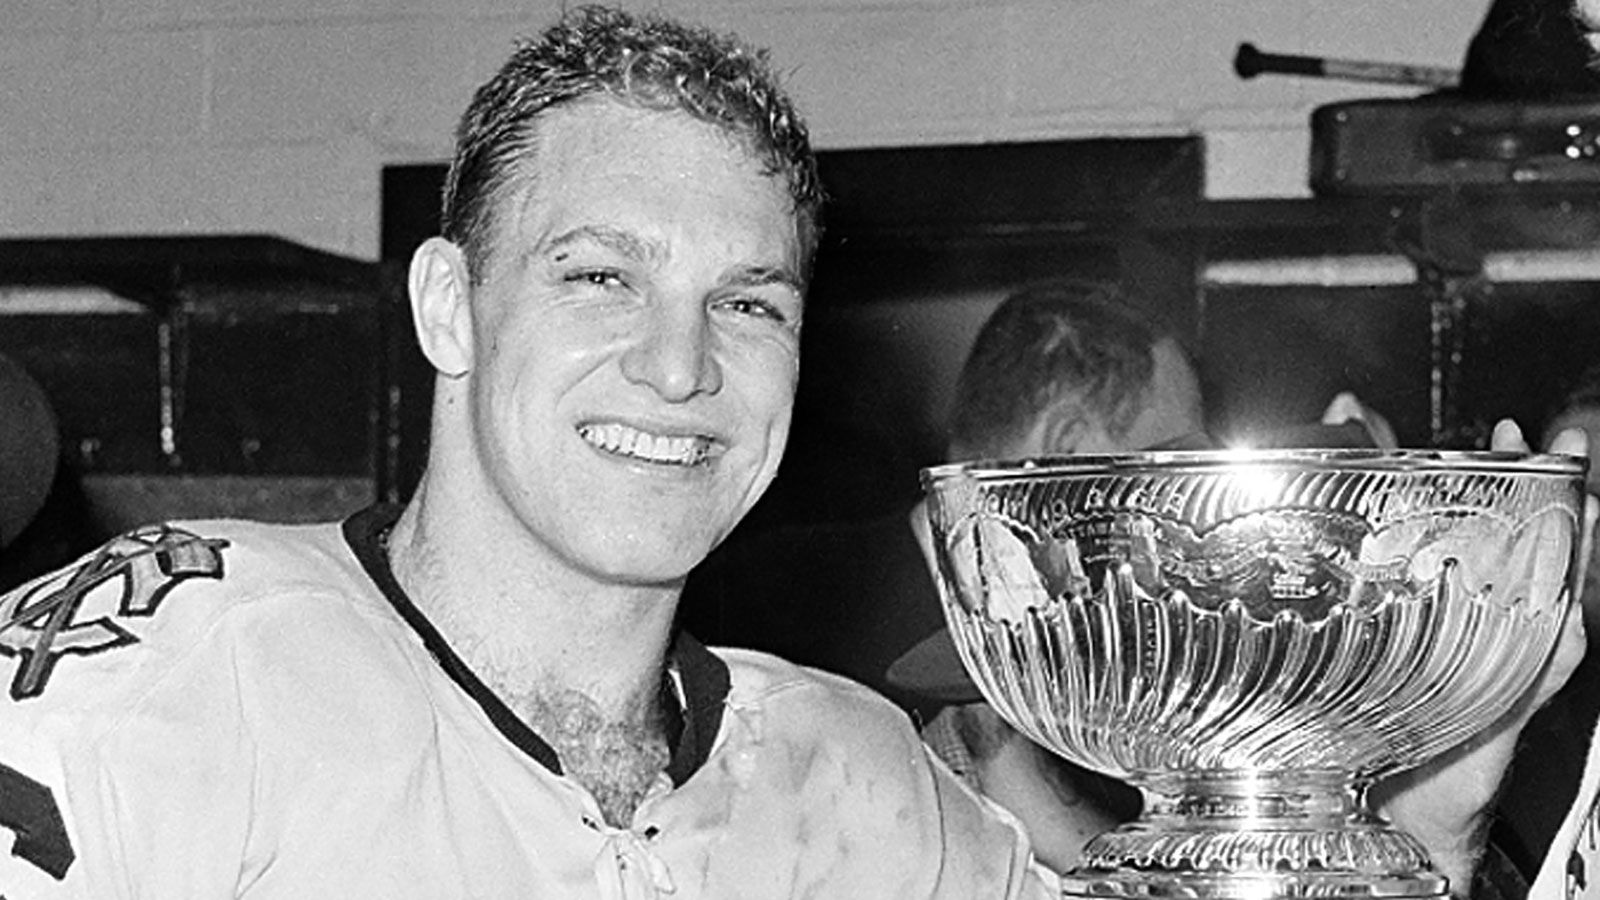 Top 10 NHL Players of all TIme------